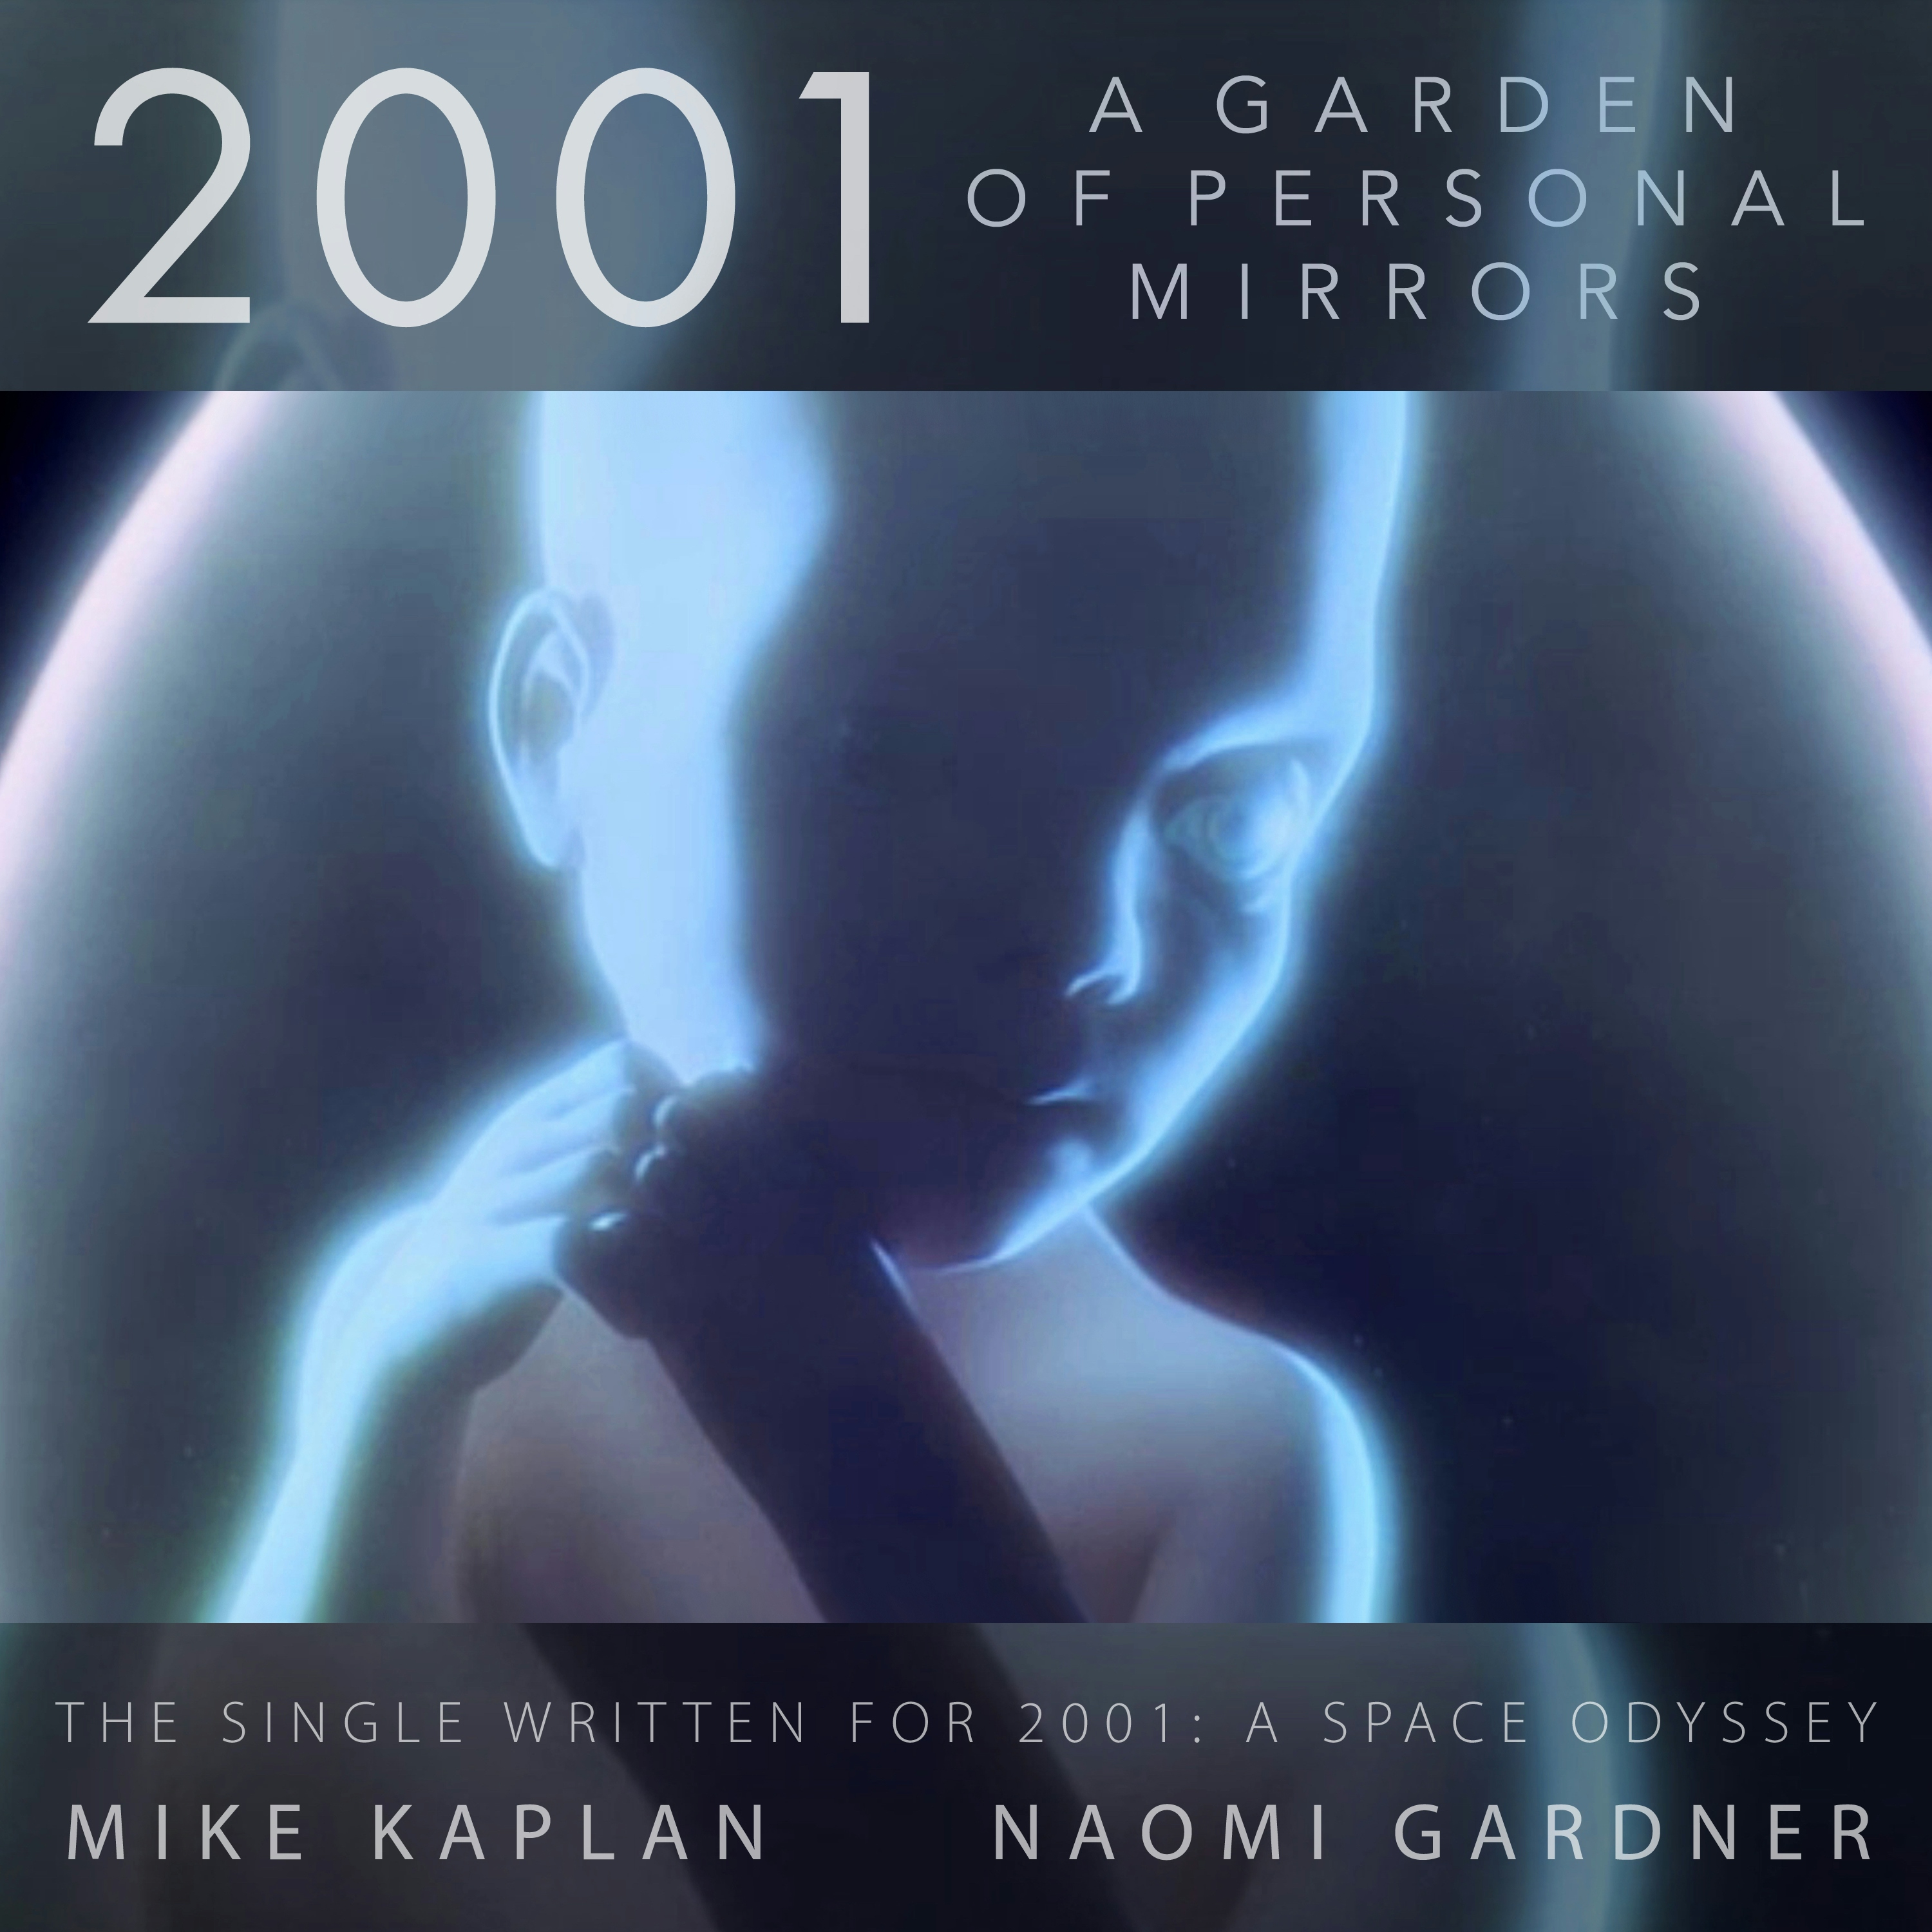 Album artwork for Album artwork for 2001: A Garden of Personal Mirrors by Mike Kaplan by 2001: A Garden of Personal Mirrors - Mike Kaplan